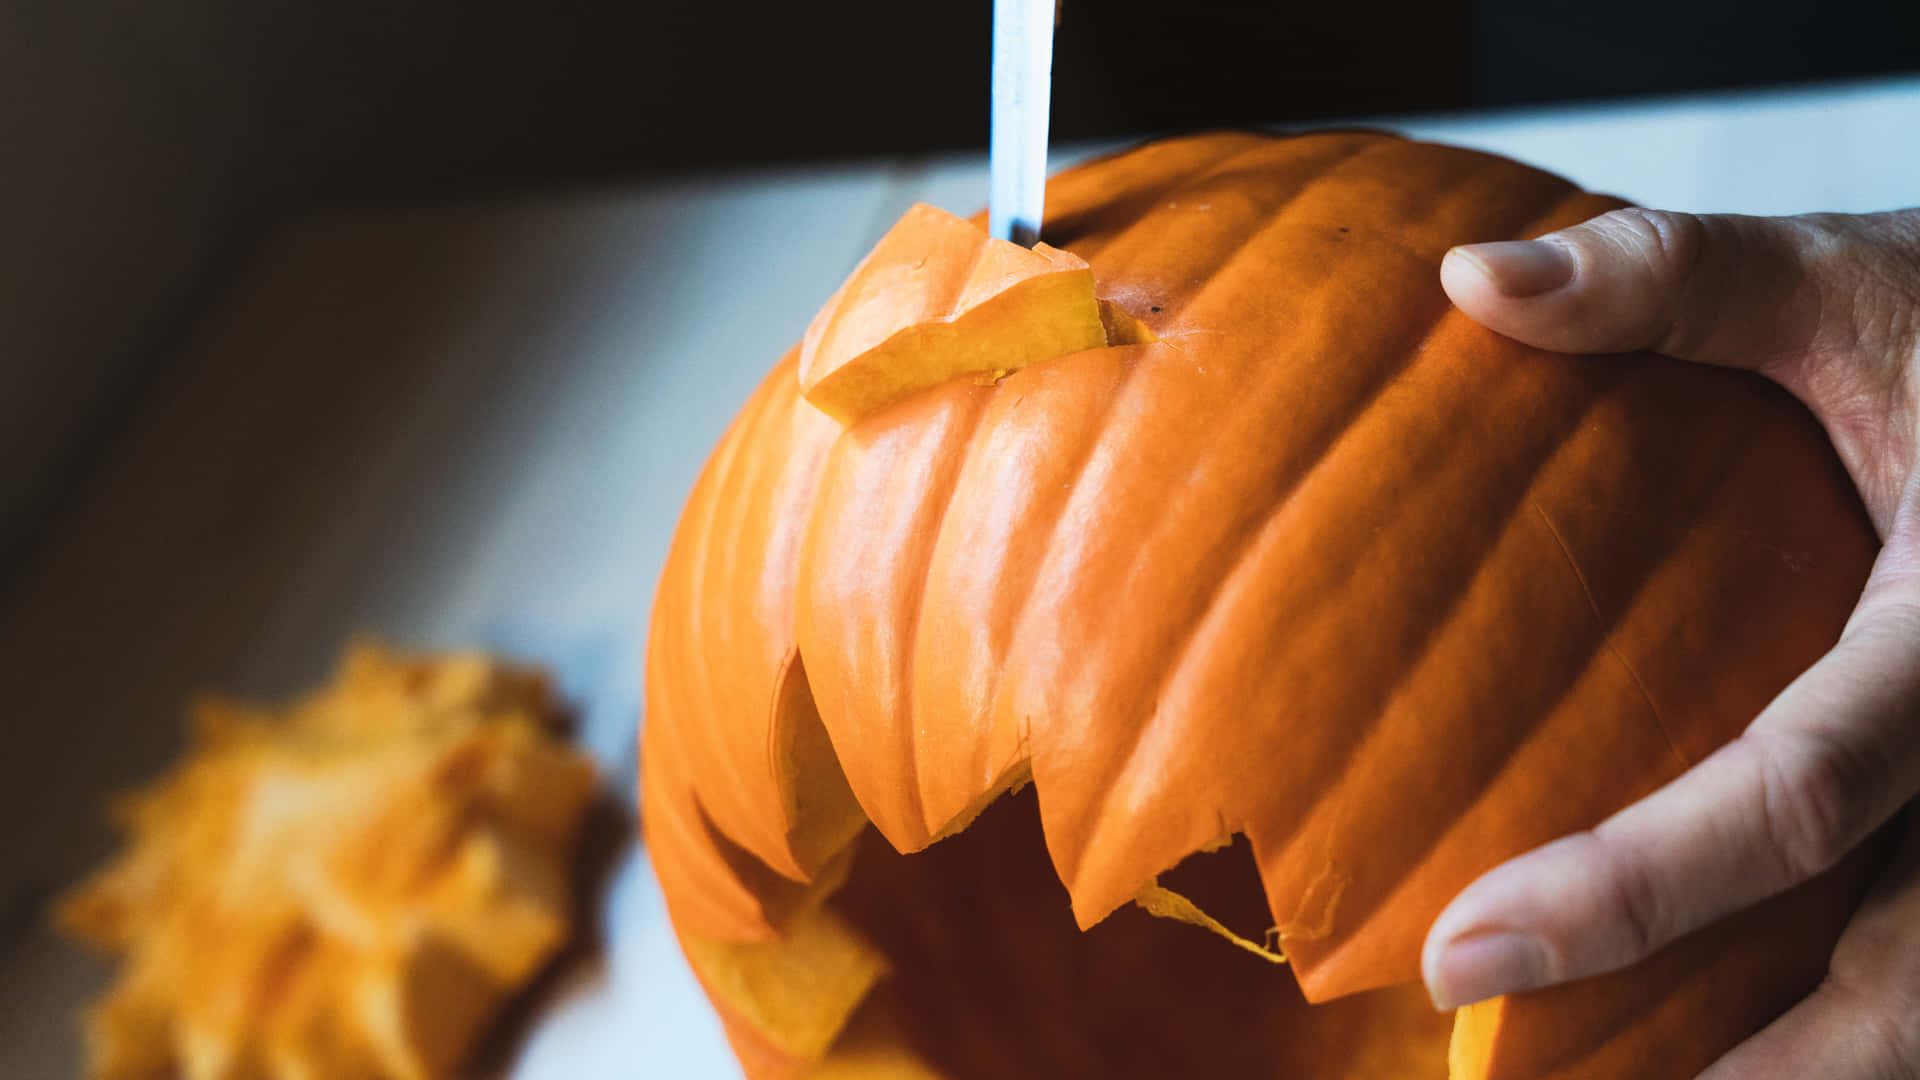 Download Pumpkin Carving With Knife Pictures | Wallpapers.com